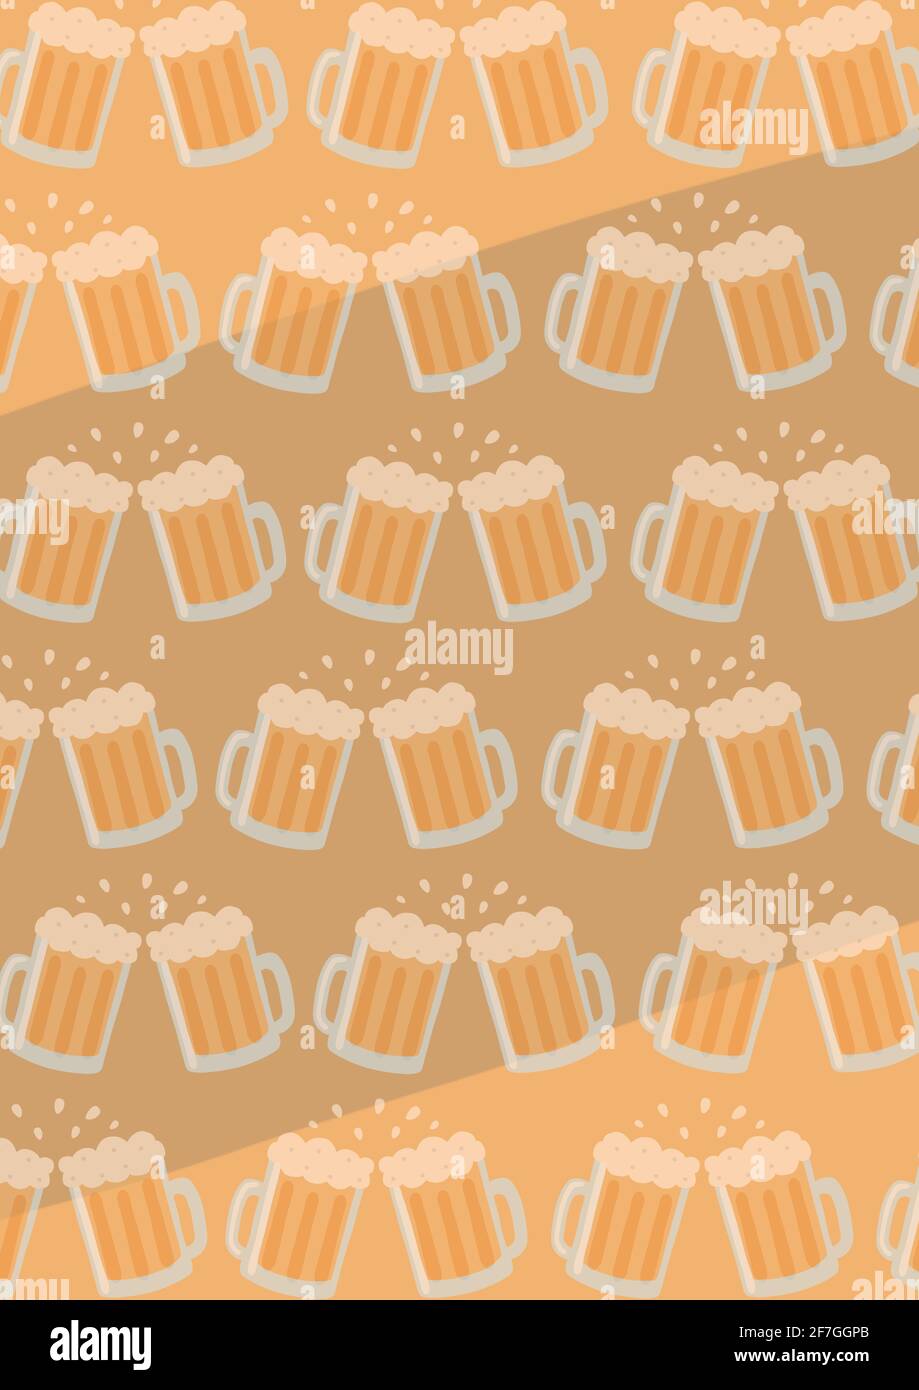 Composition of pairs of beer glasses in rows making toast on orange background Stock Photo